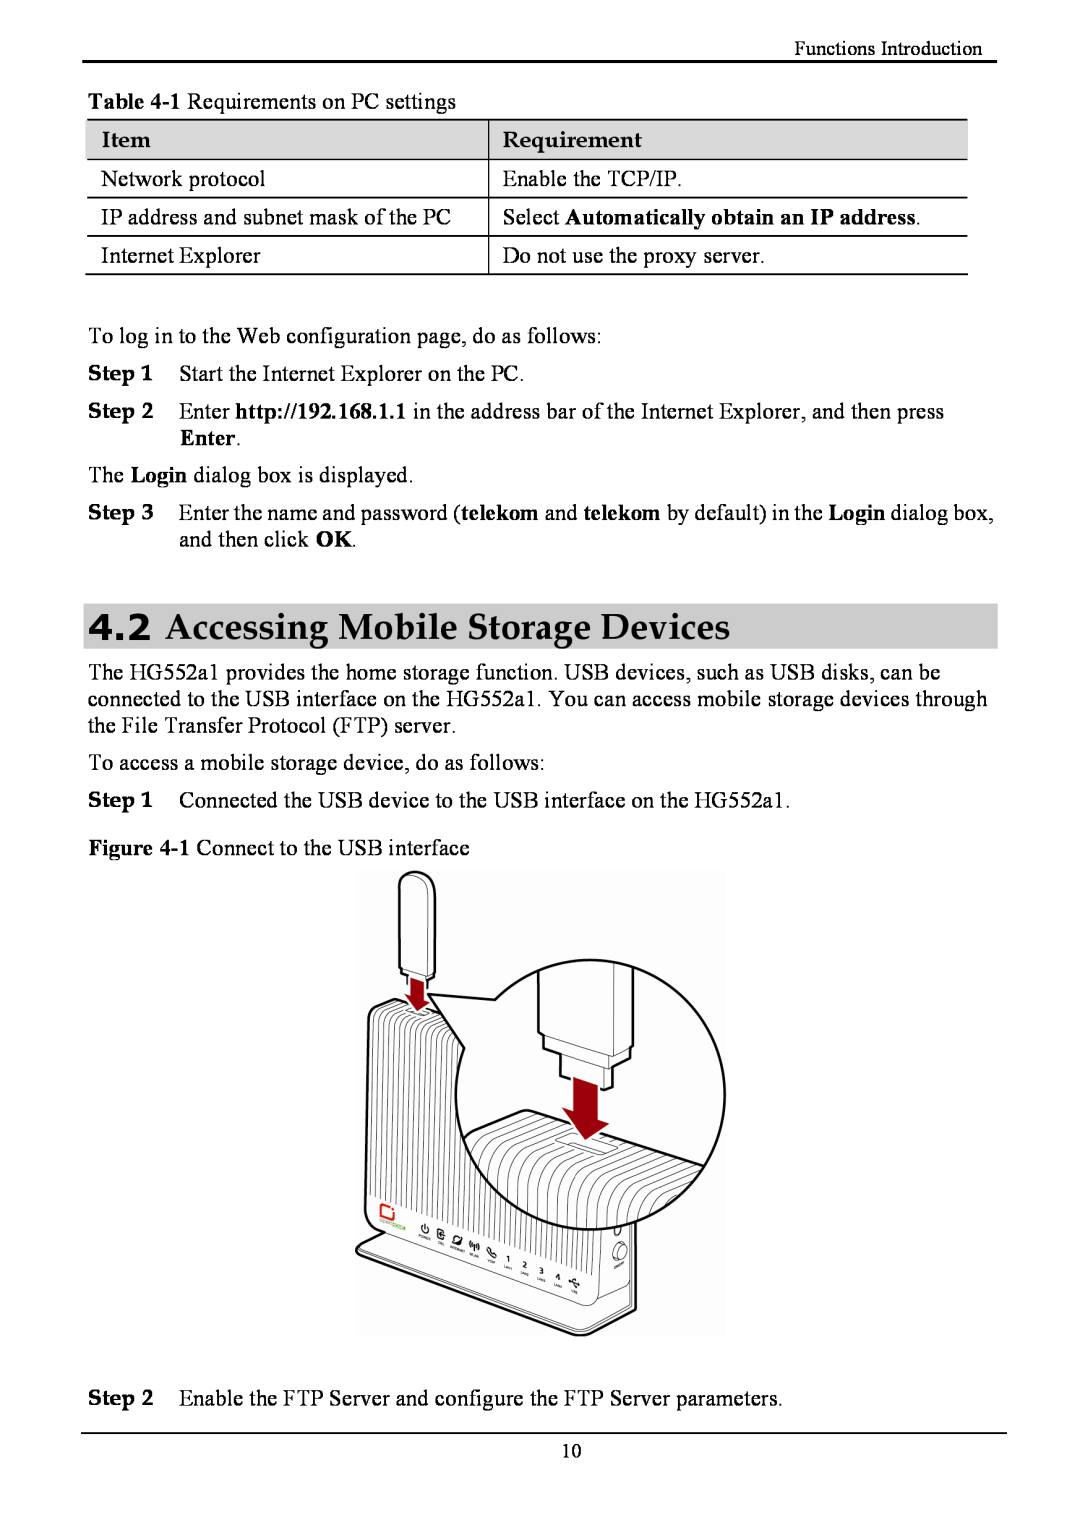 Huawei HG552a1 manual Accessing Mobile Storage Devices, Requirement, Select Automatically obtain an IP address, Enter 